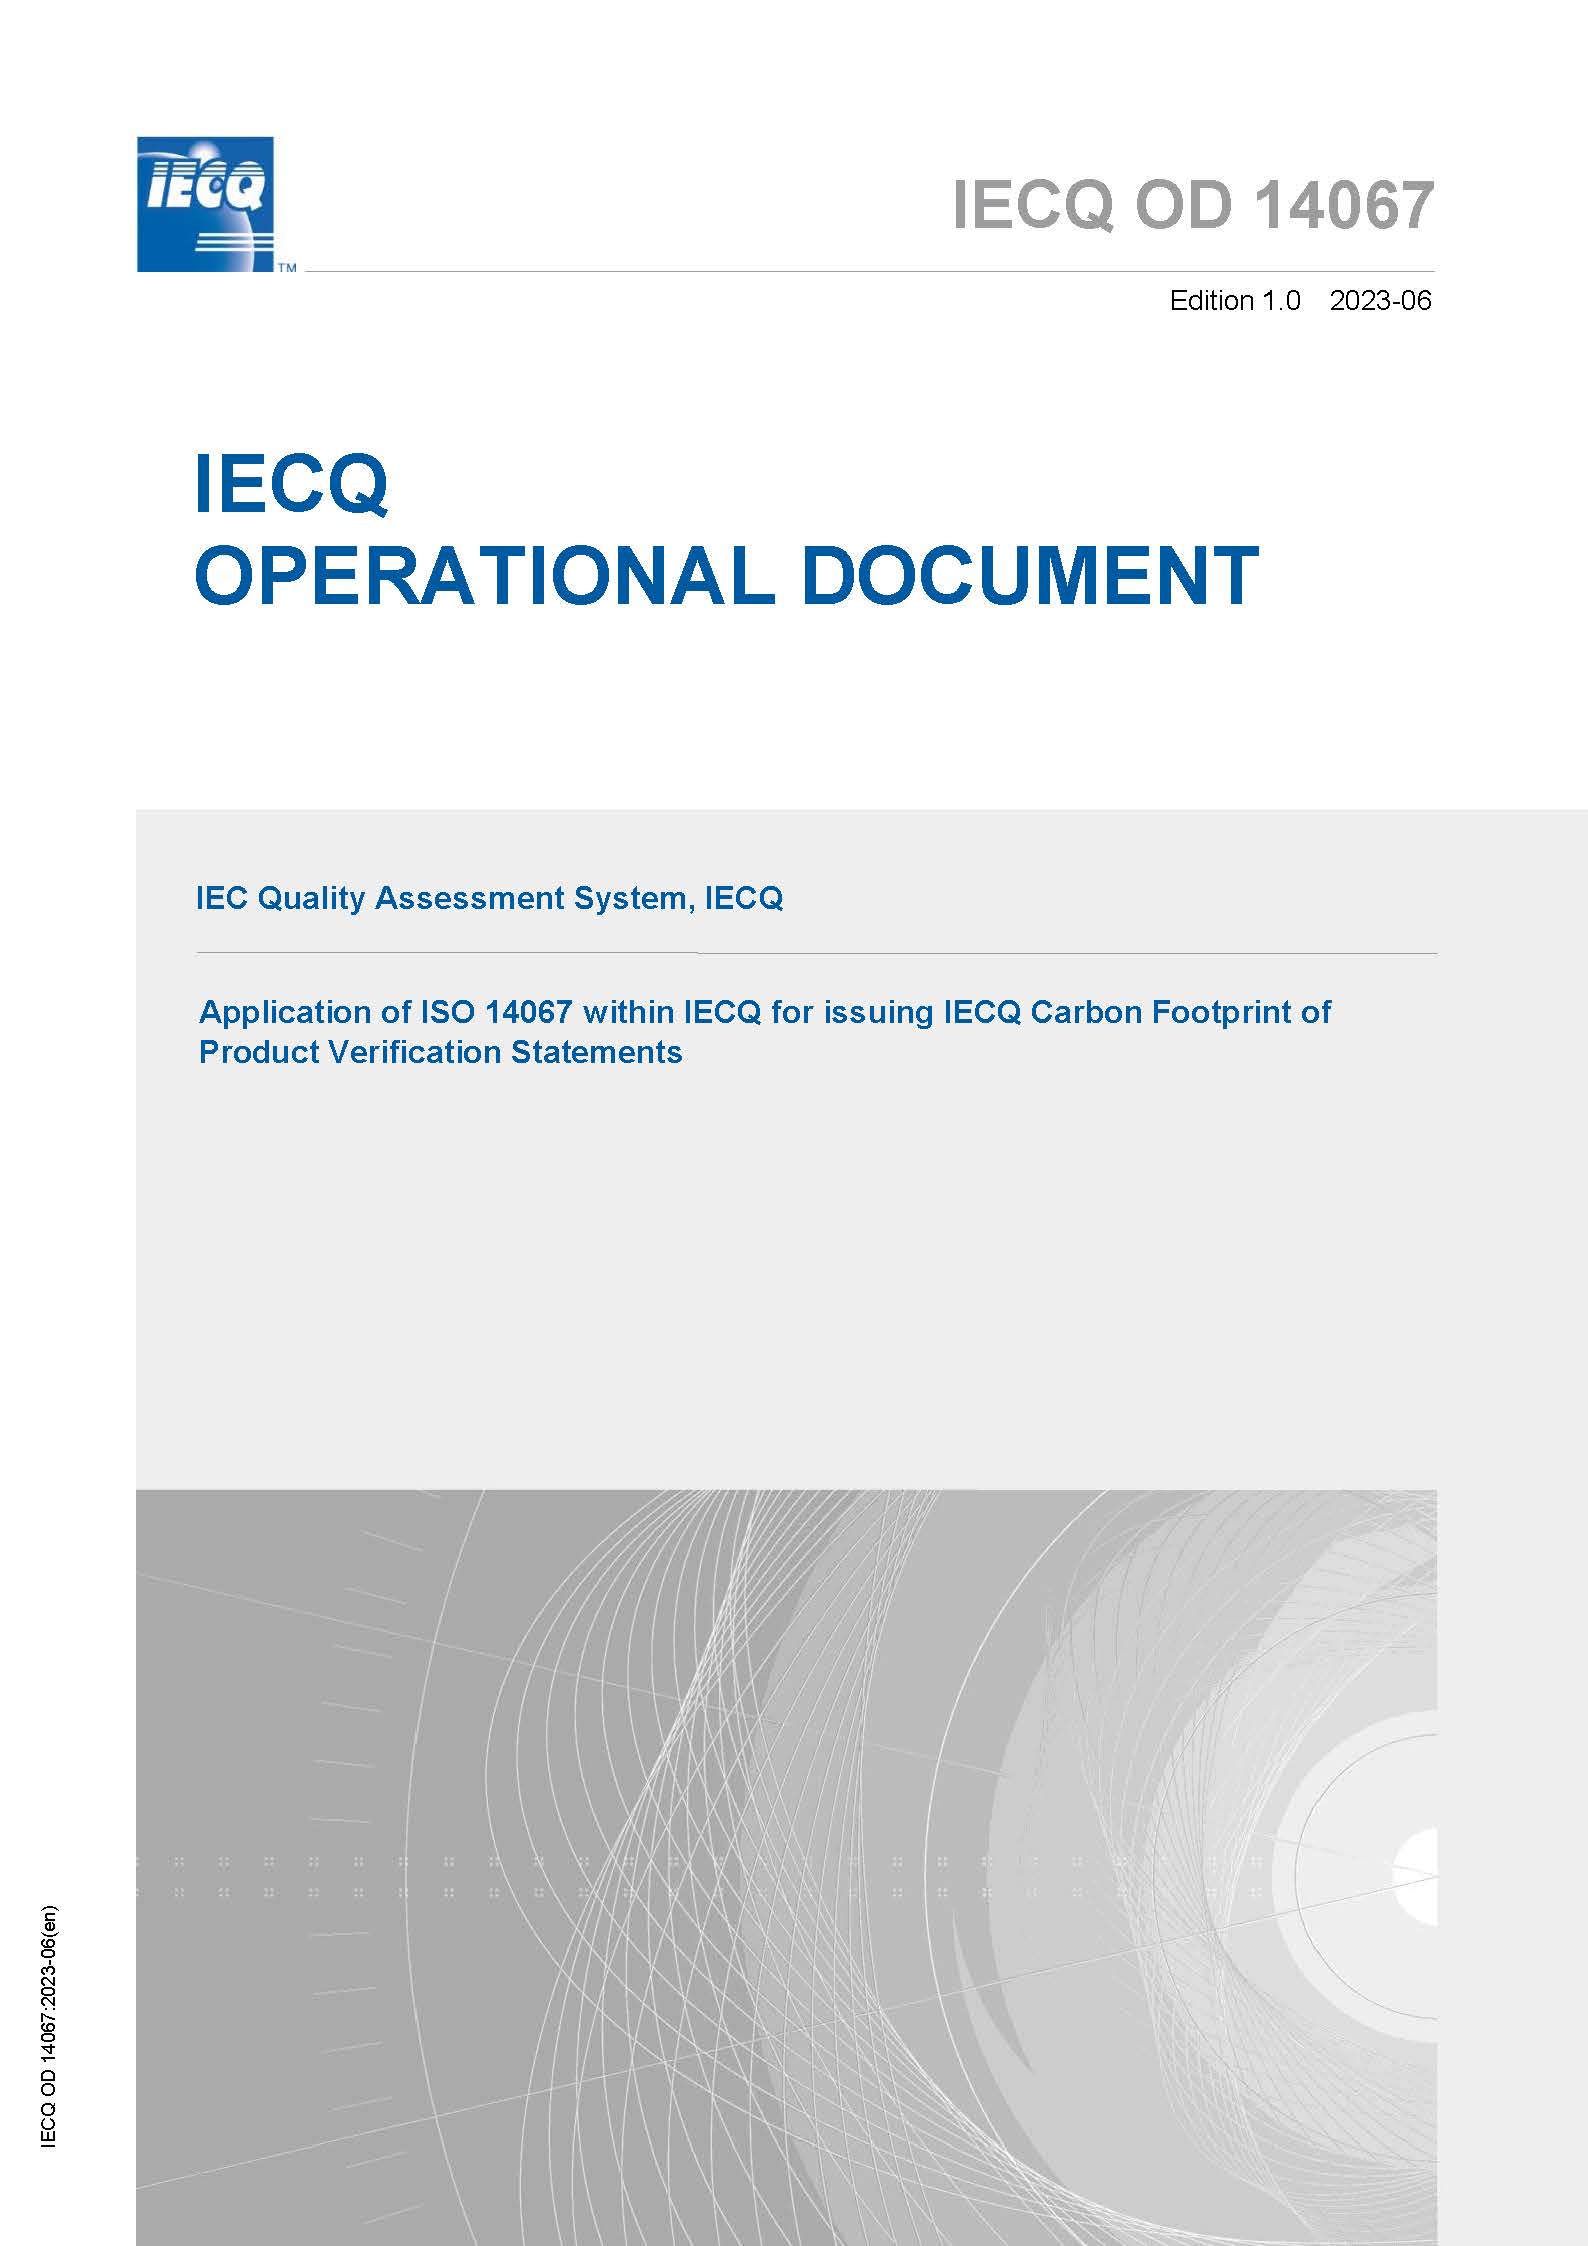 IECQ Rules of Procedure - Part 3-3: IECQ Approved Component Products, Related Materials & Assemblies Scheme, IECQ Approved Component – Capability Certification (IECQ AC-C)